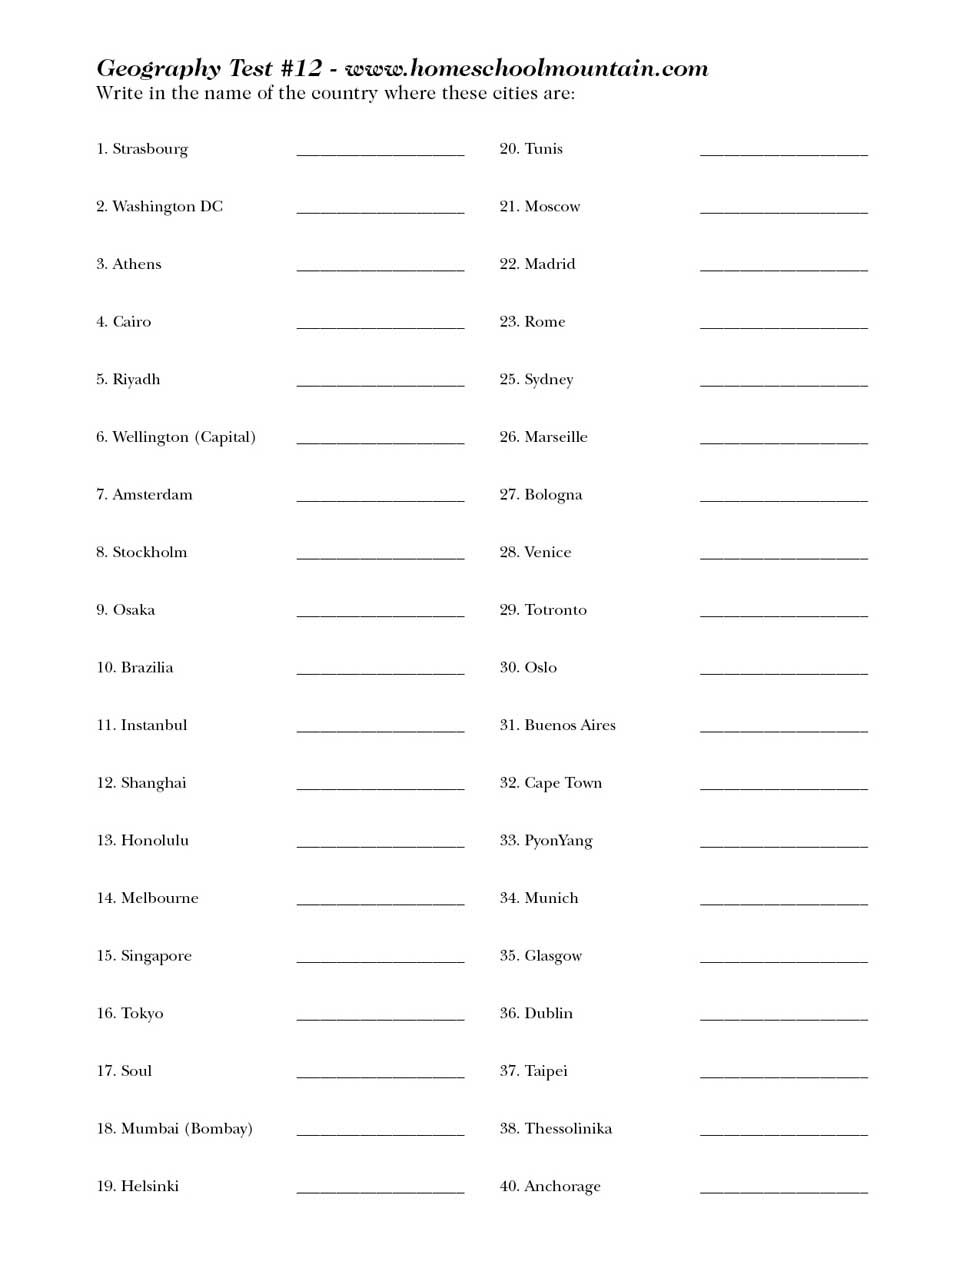 Geography test 12 - 40 Cities of the world